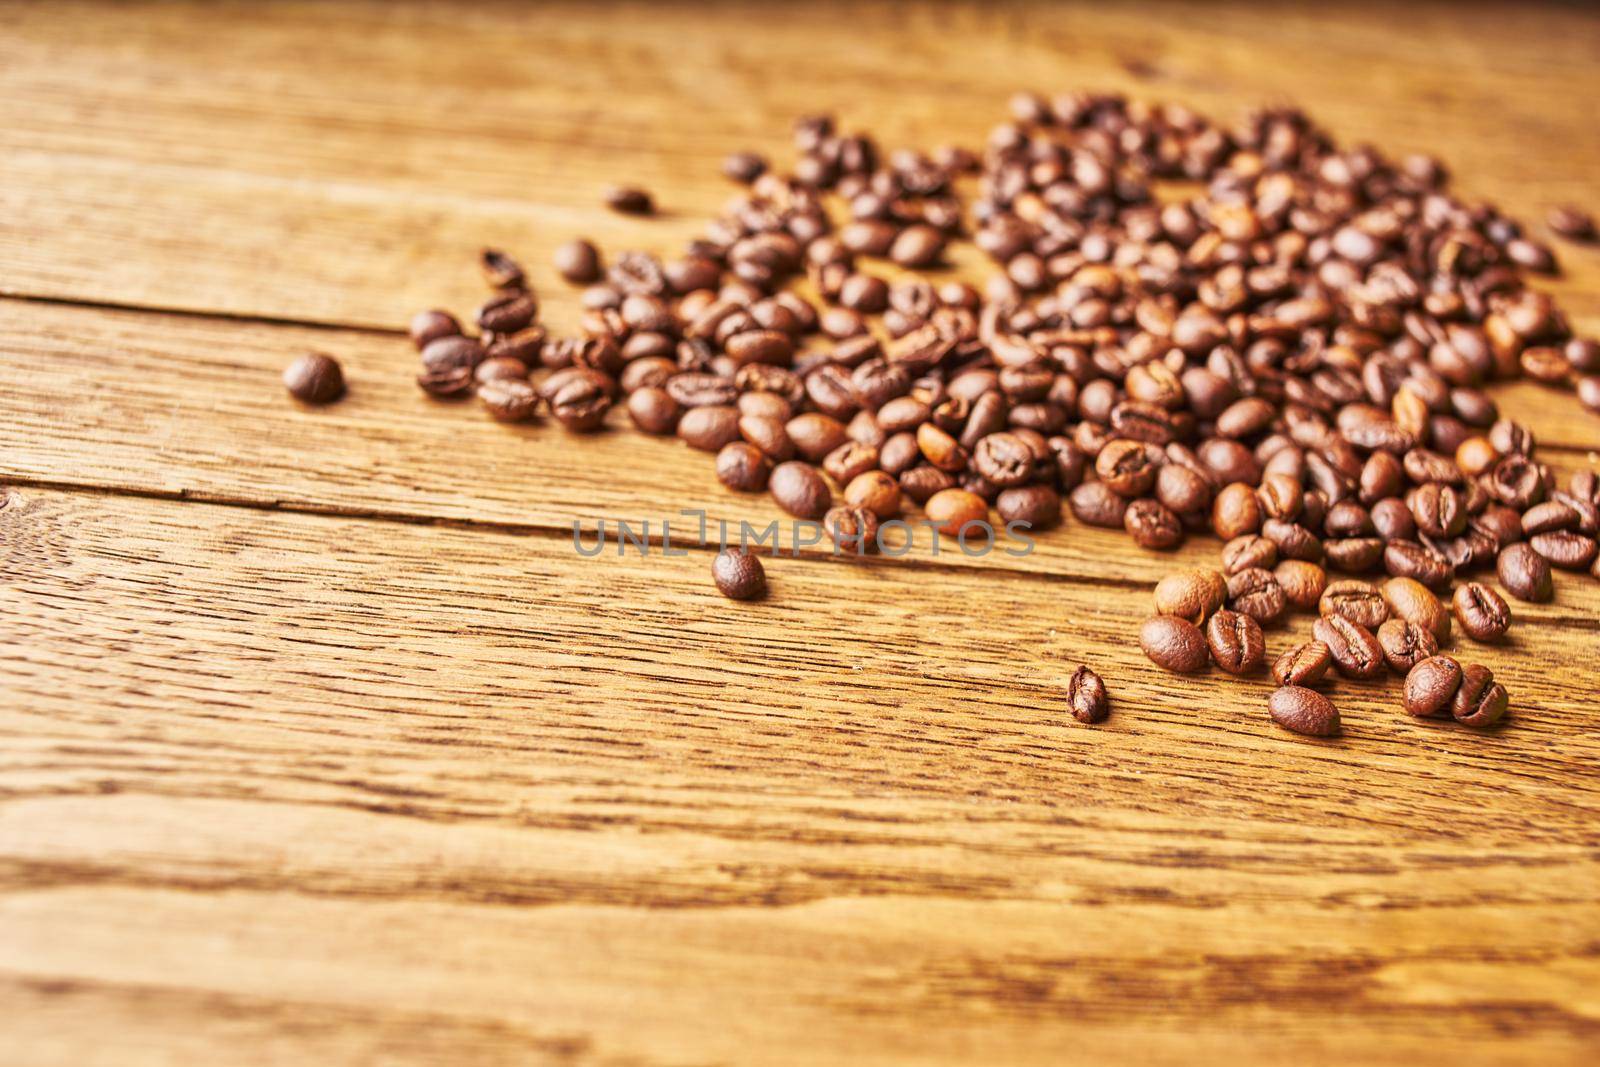 Grain bag gourmet latte pictures wood background by Vichizh